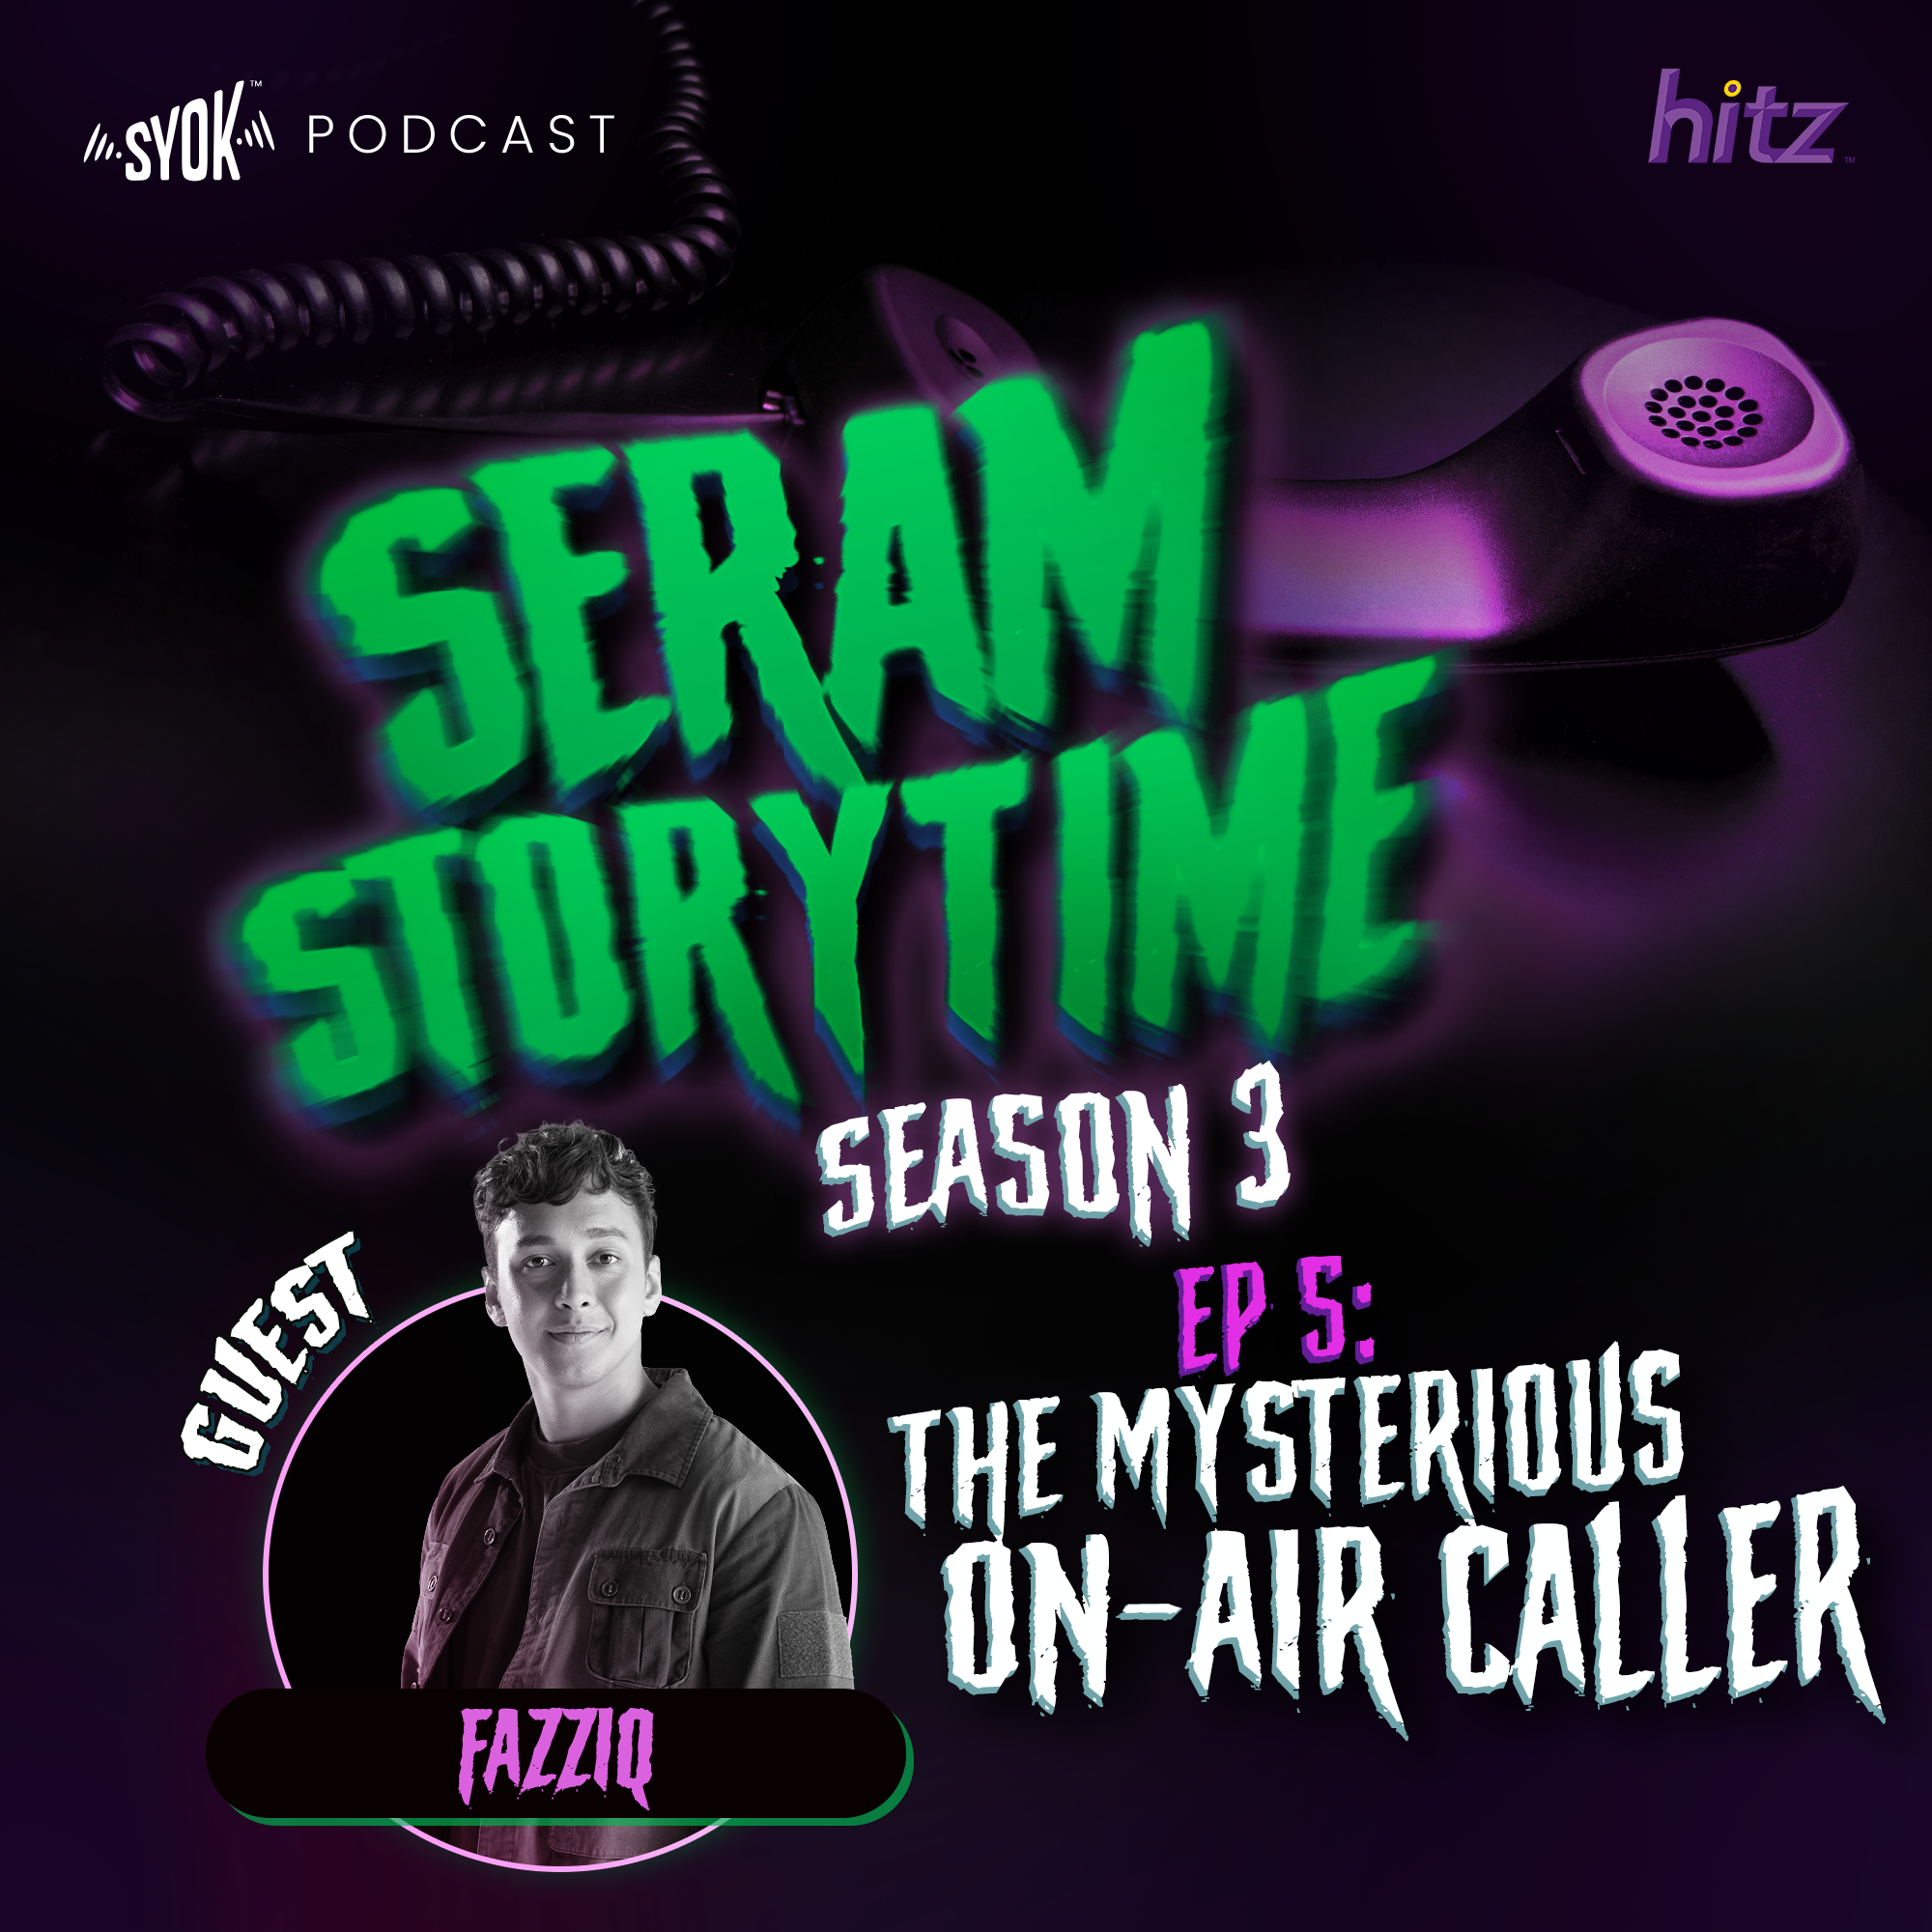 The Mysterious On-Air Caller, with Fazziq Muqris | Seram Storytime S3E5